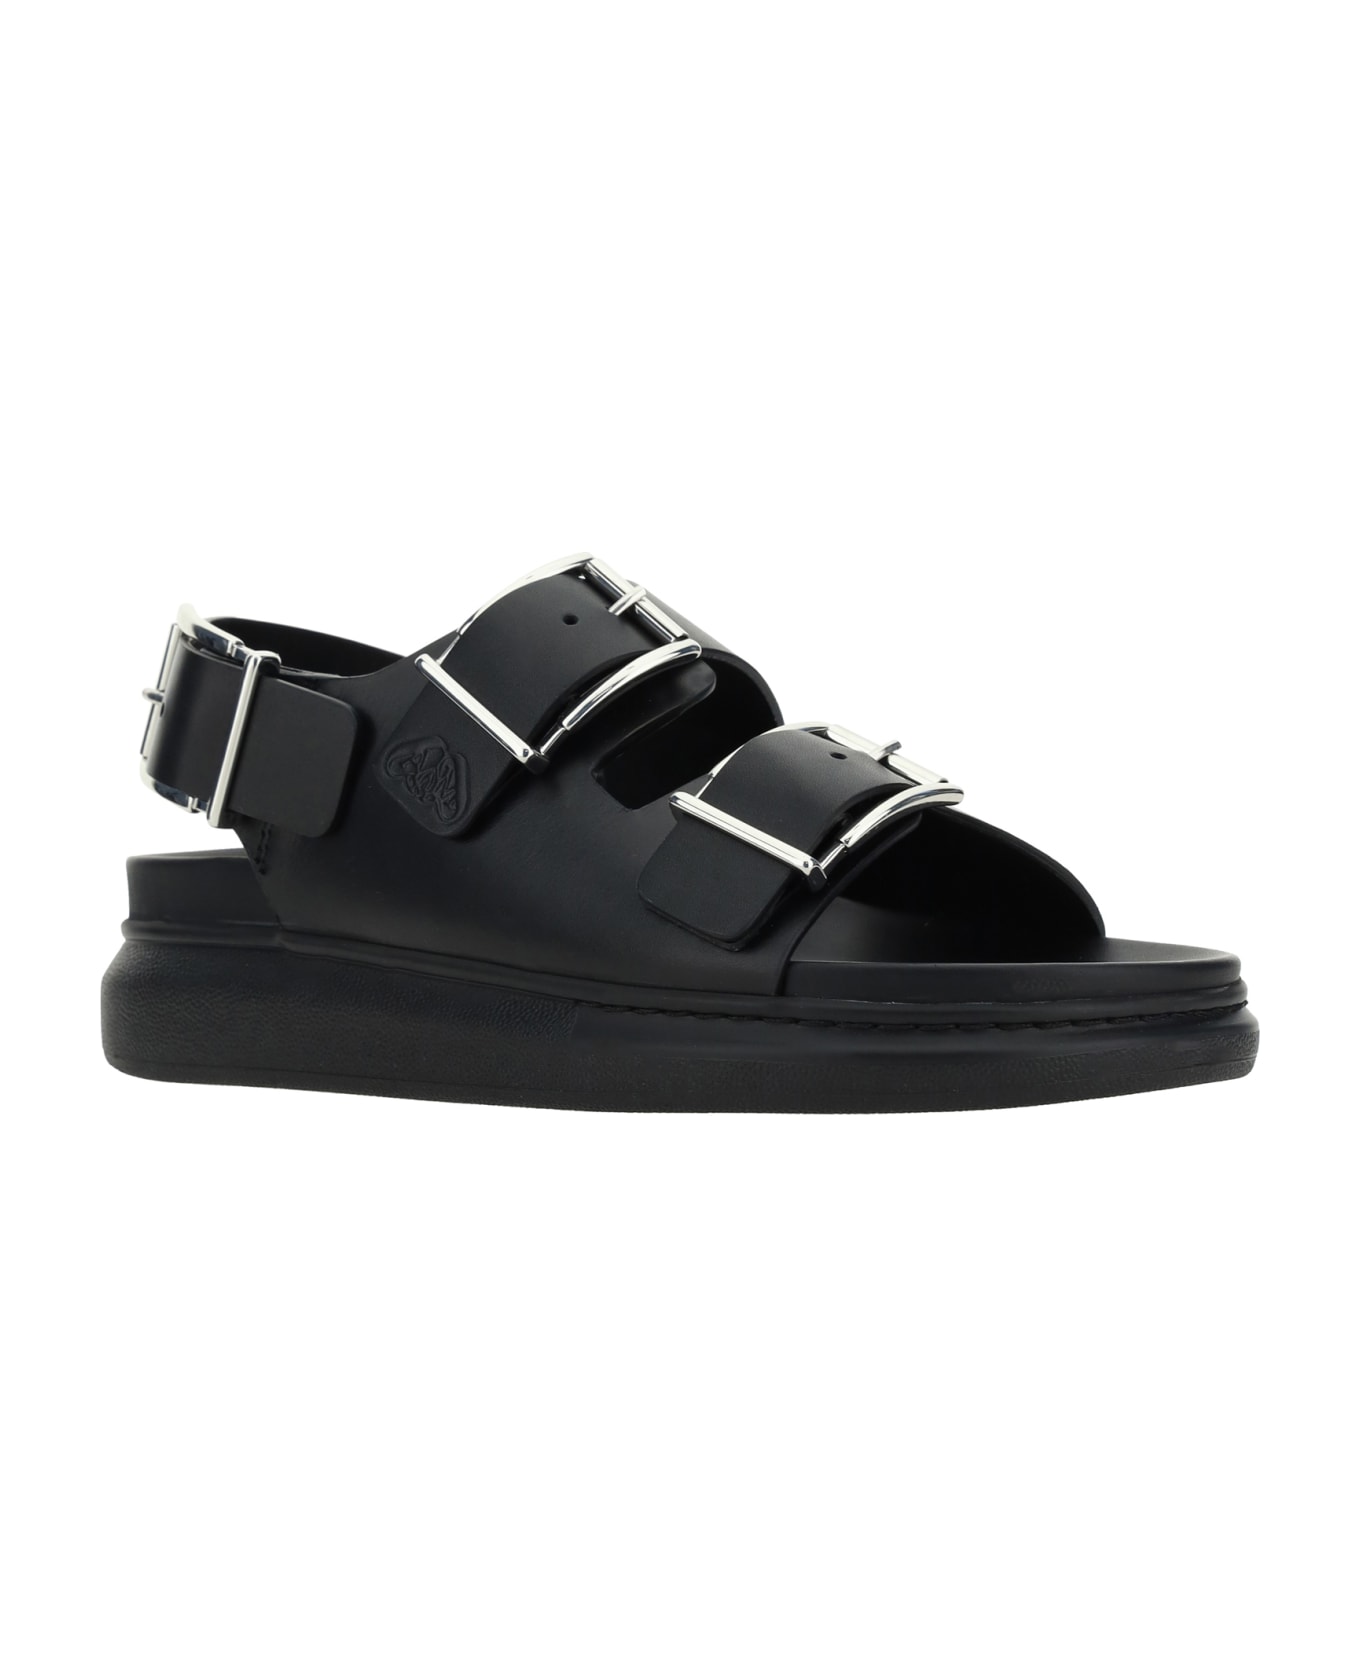 Alexander McQueen Leather Sandal - Black/silver その他各種シューズ